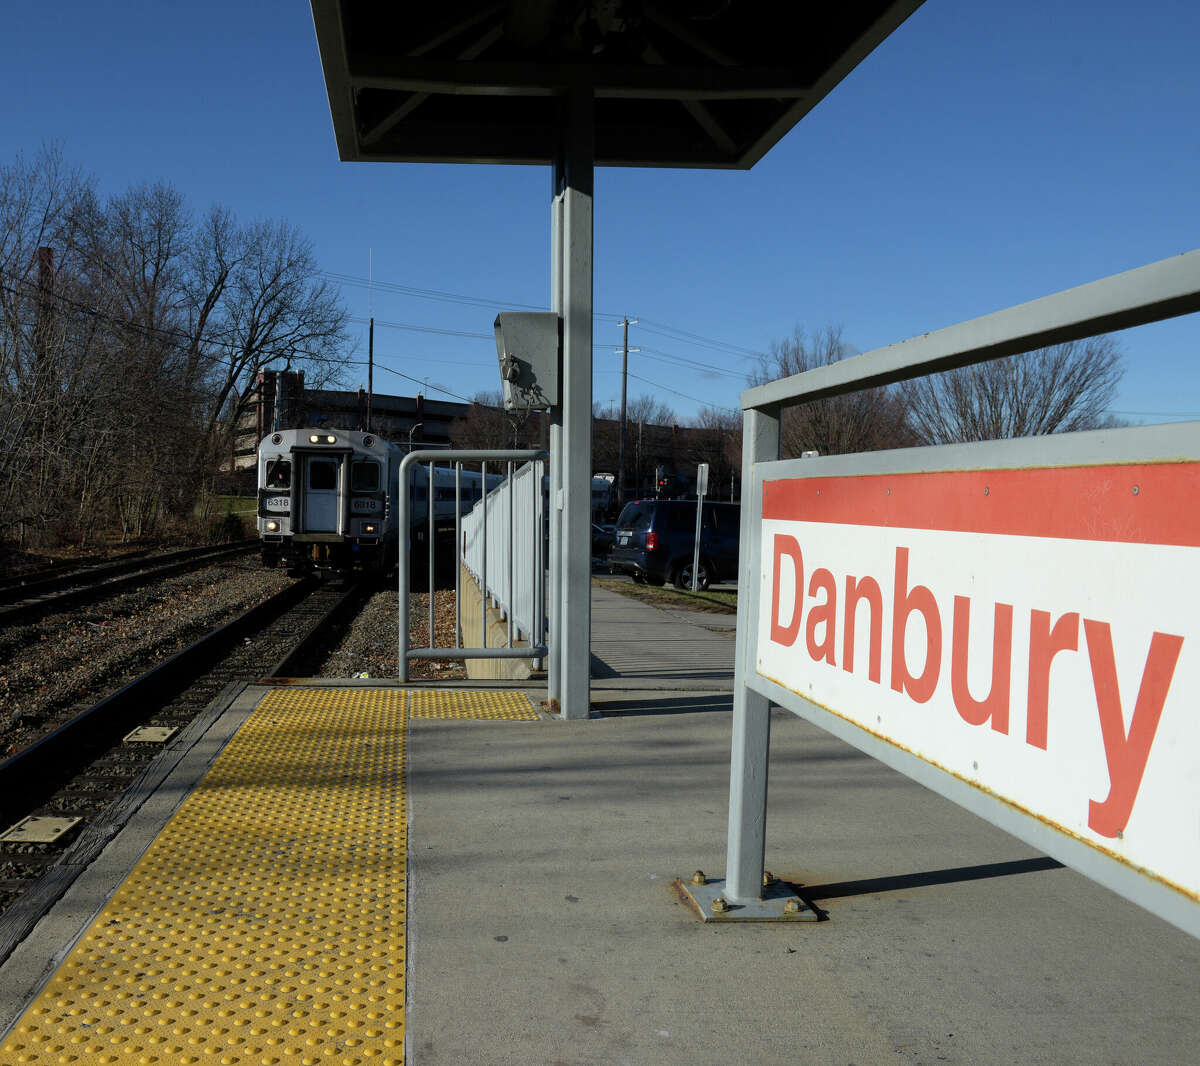 The train pulls up to the Metro North station in Danbury. Tuesday, December 20, 2022, Danbury, Conn.